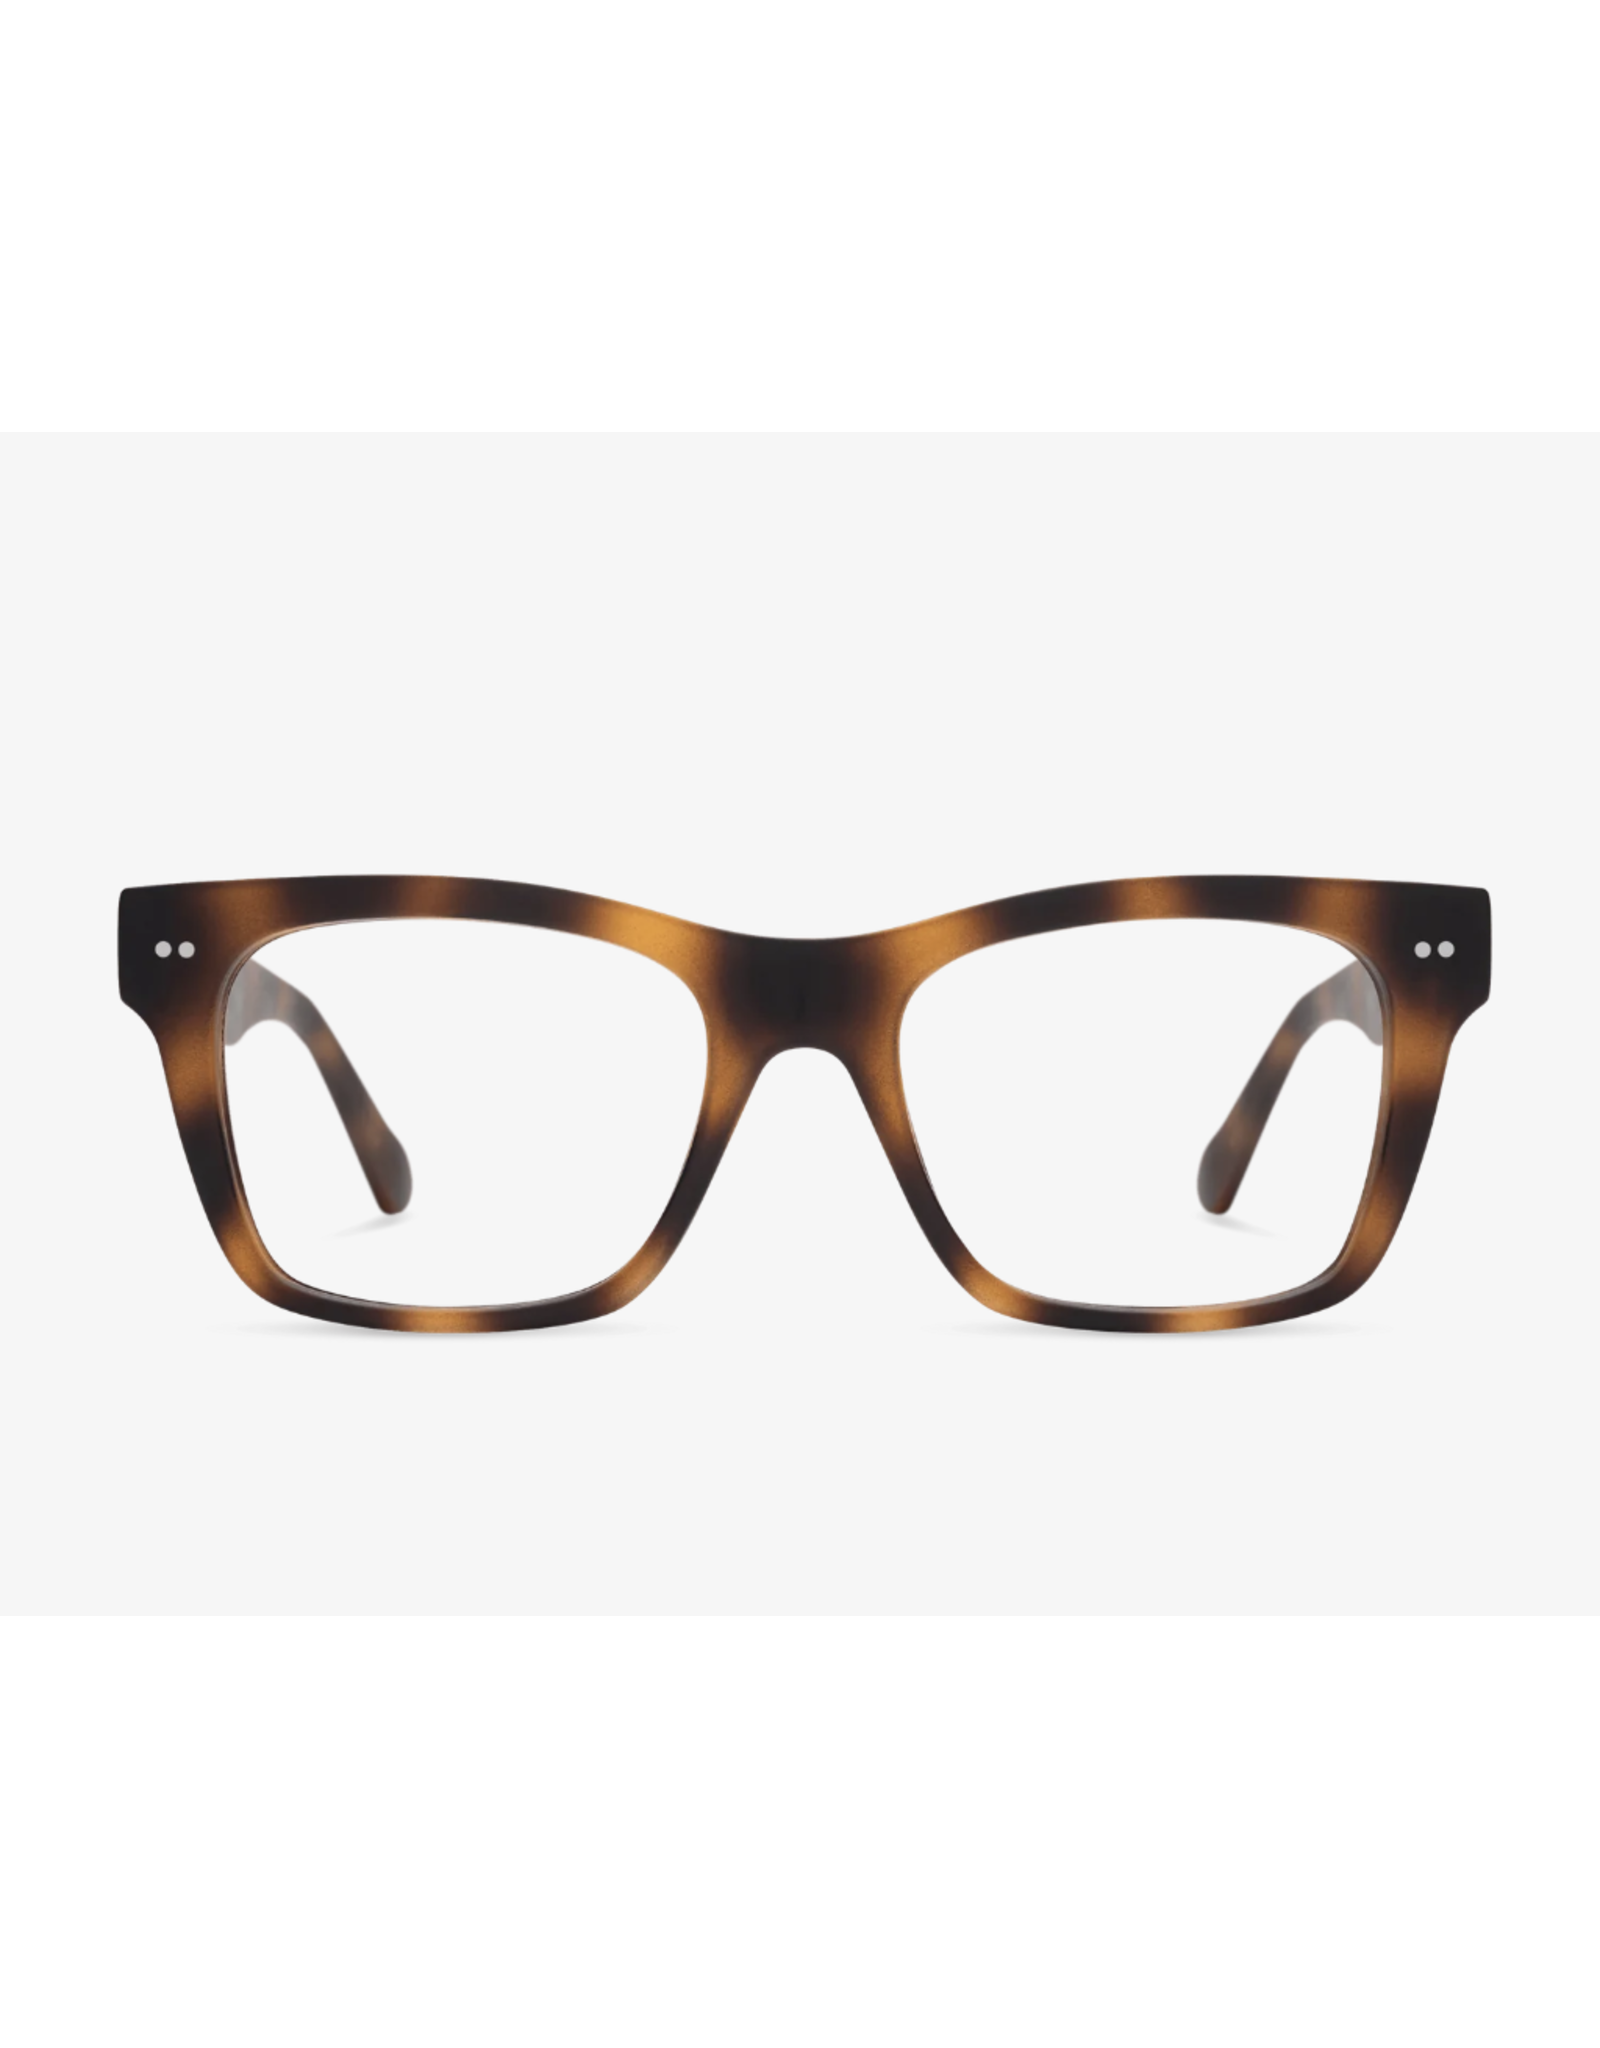 LOOK Cosmo Readers in Tortoise, 2.0 Magnification